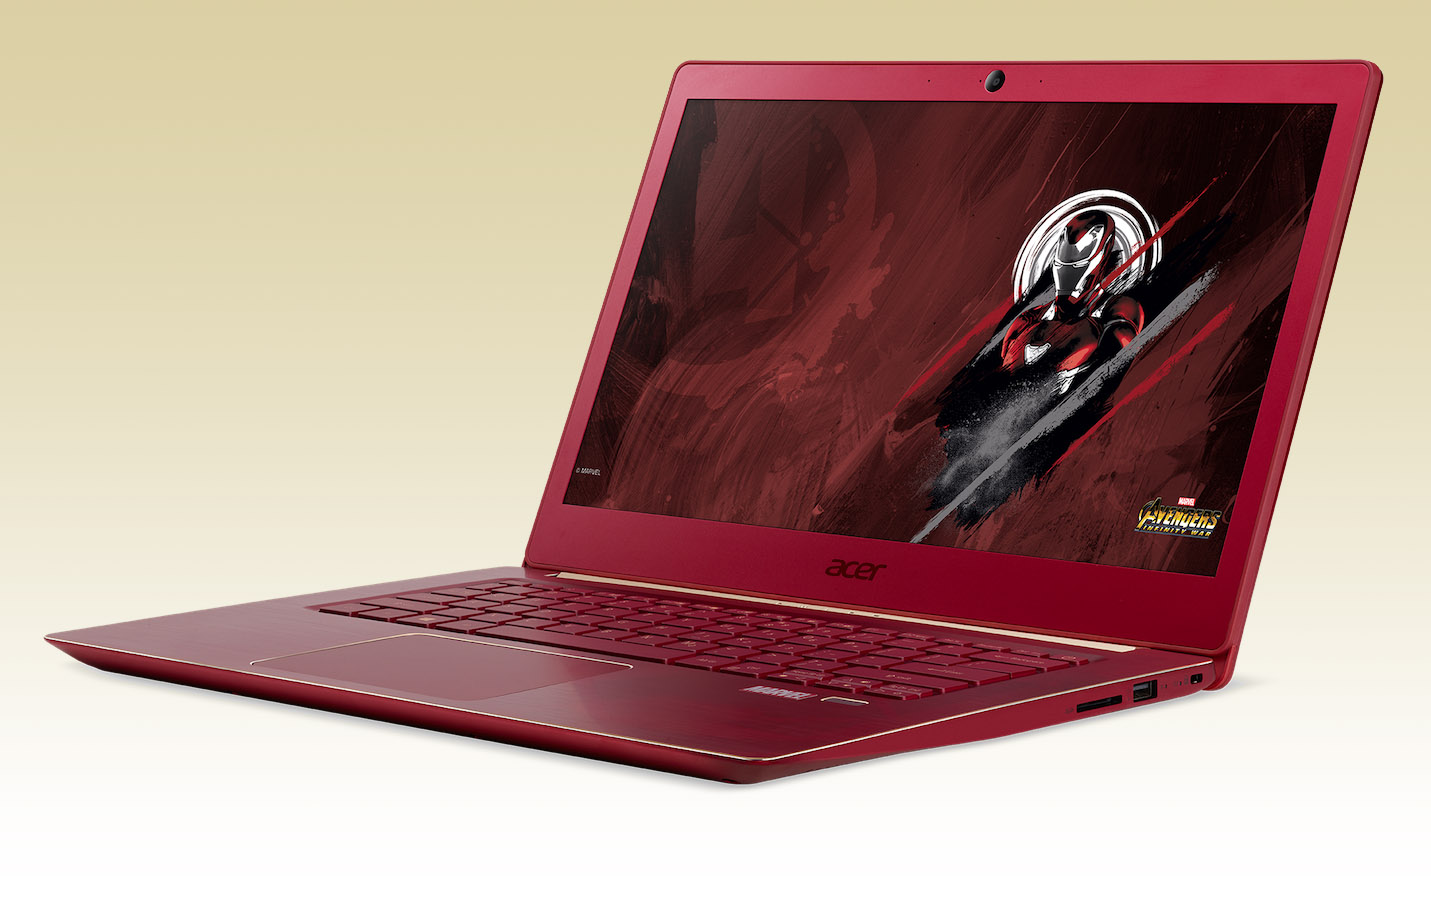 Acer and Marvel Studios unveils “Avengers: Infinity War” Special Notebooks